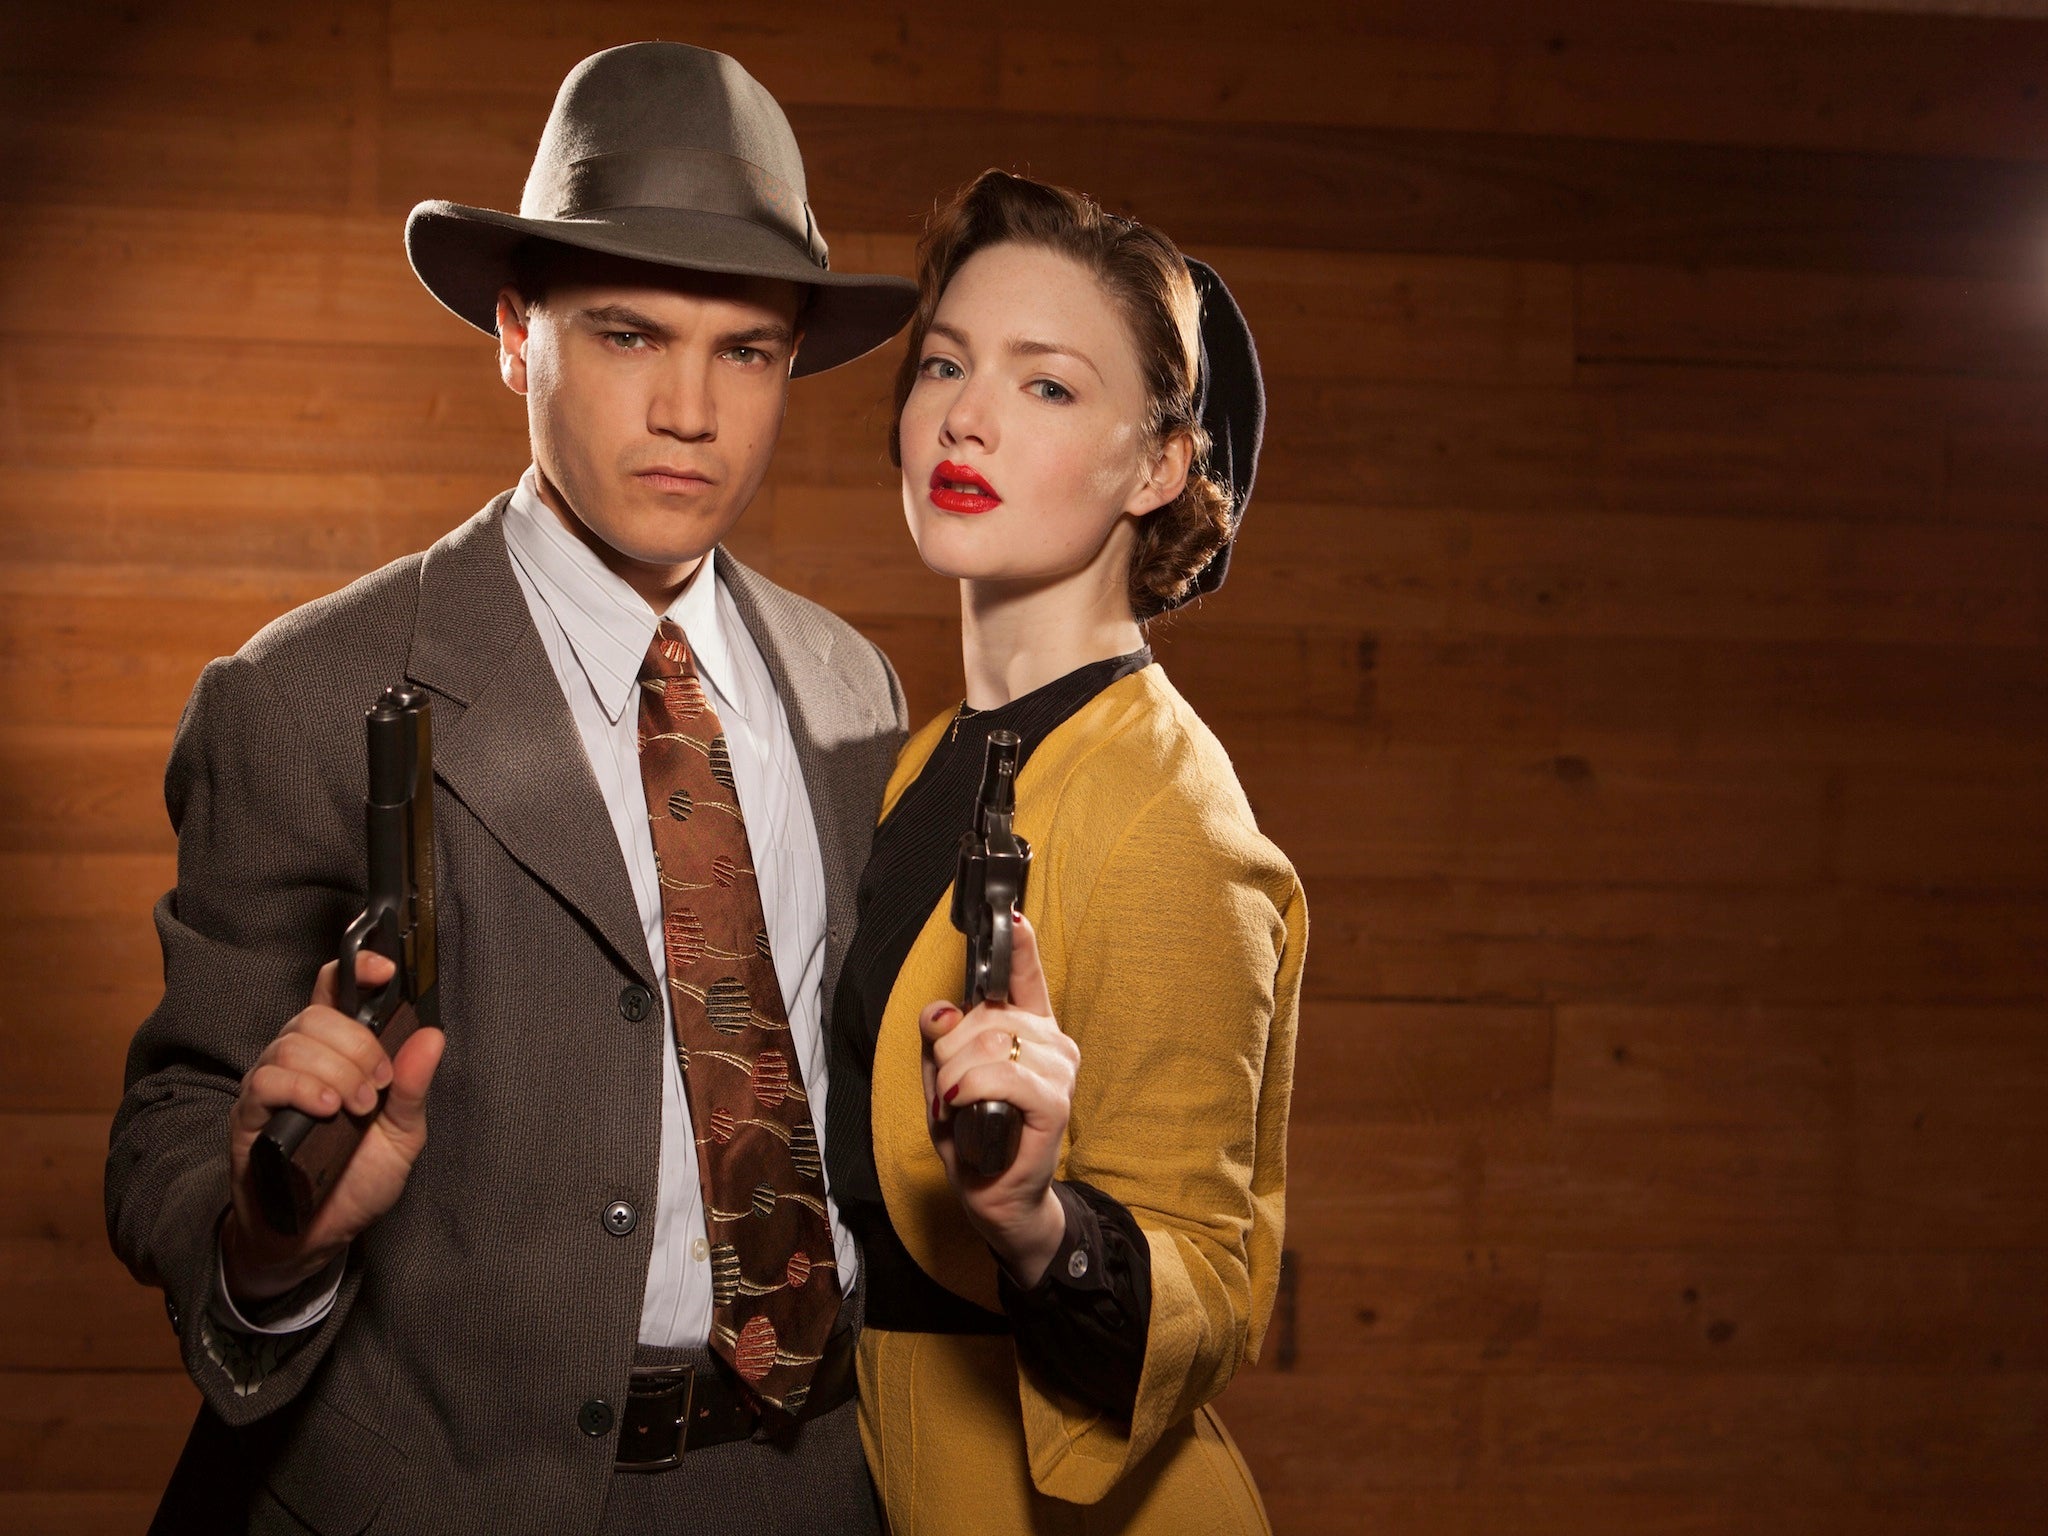 Emile Hirsch and Holliday Grainger as Bonnie and Clyde in the new TV miniseries